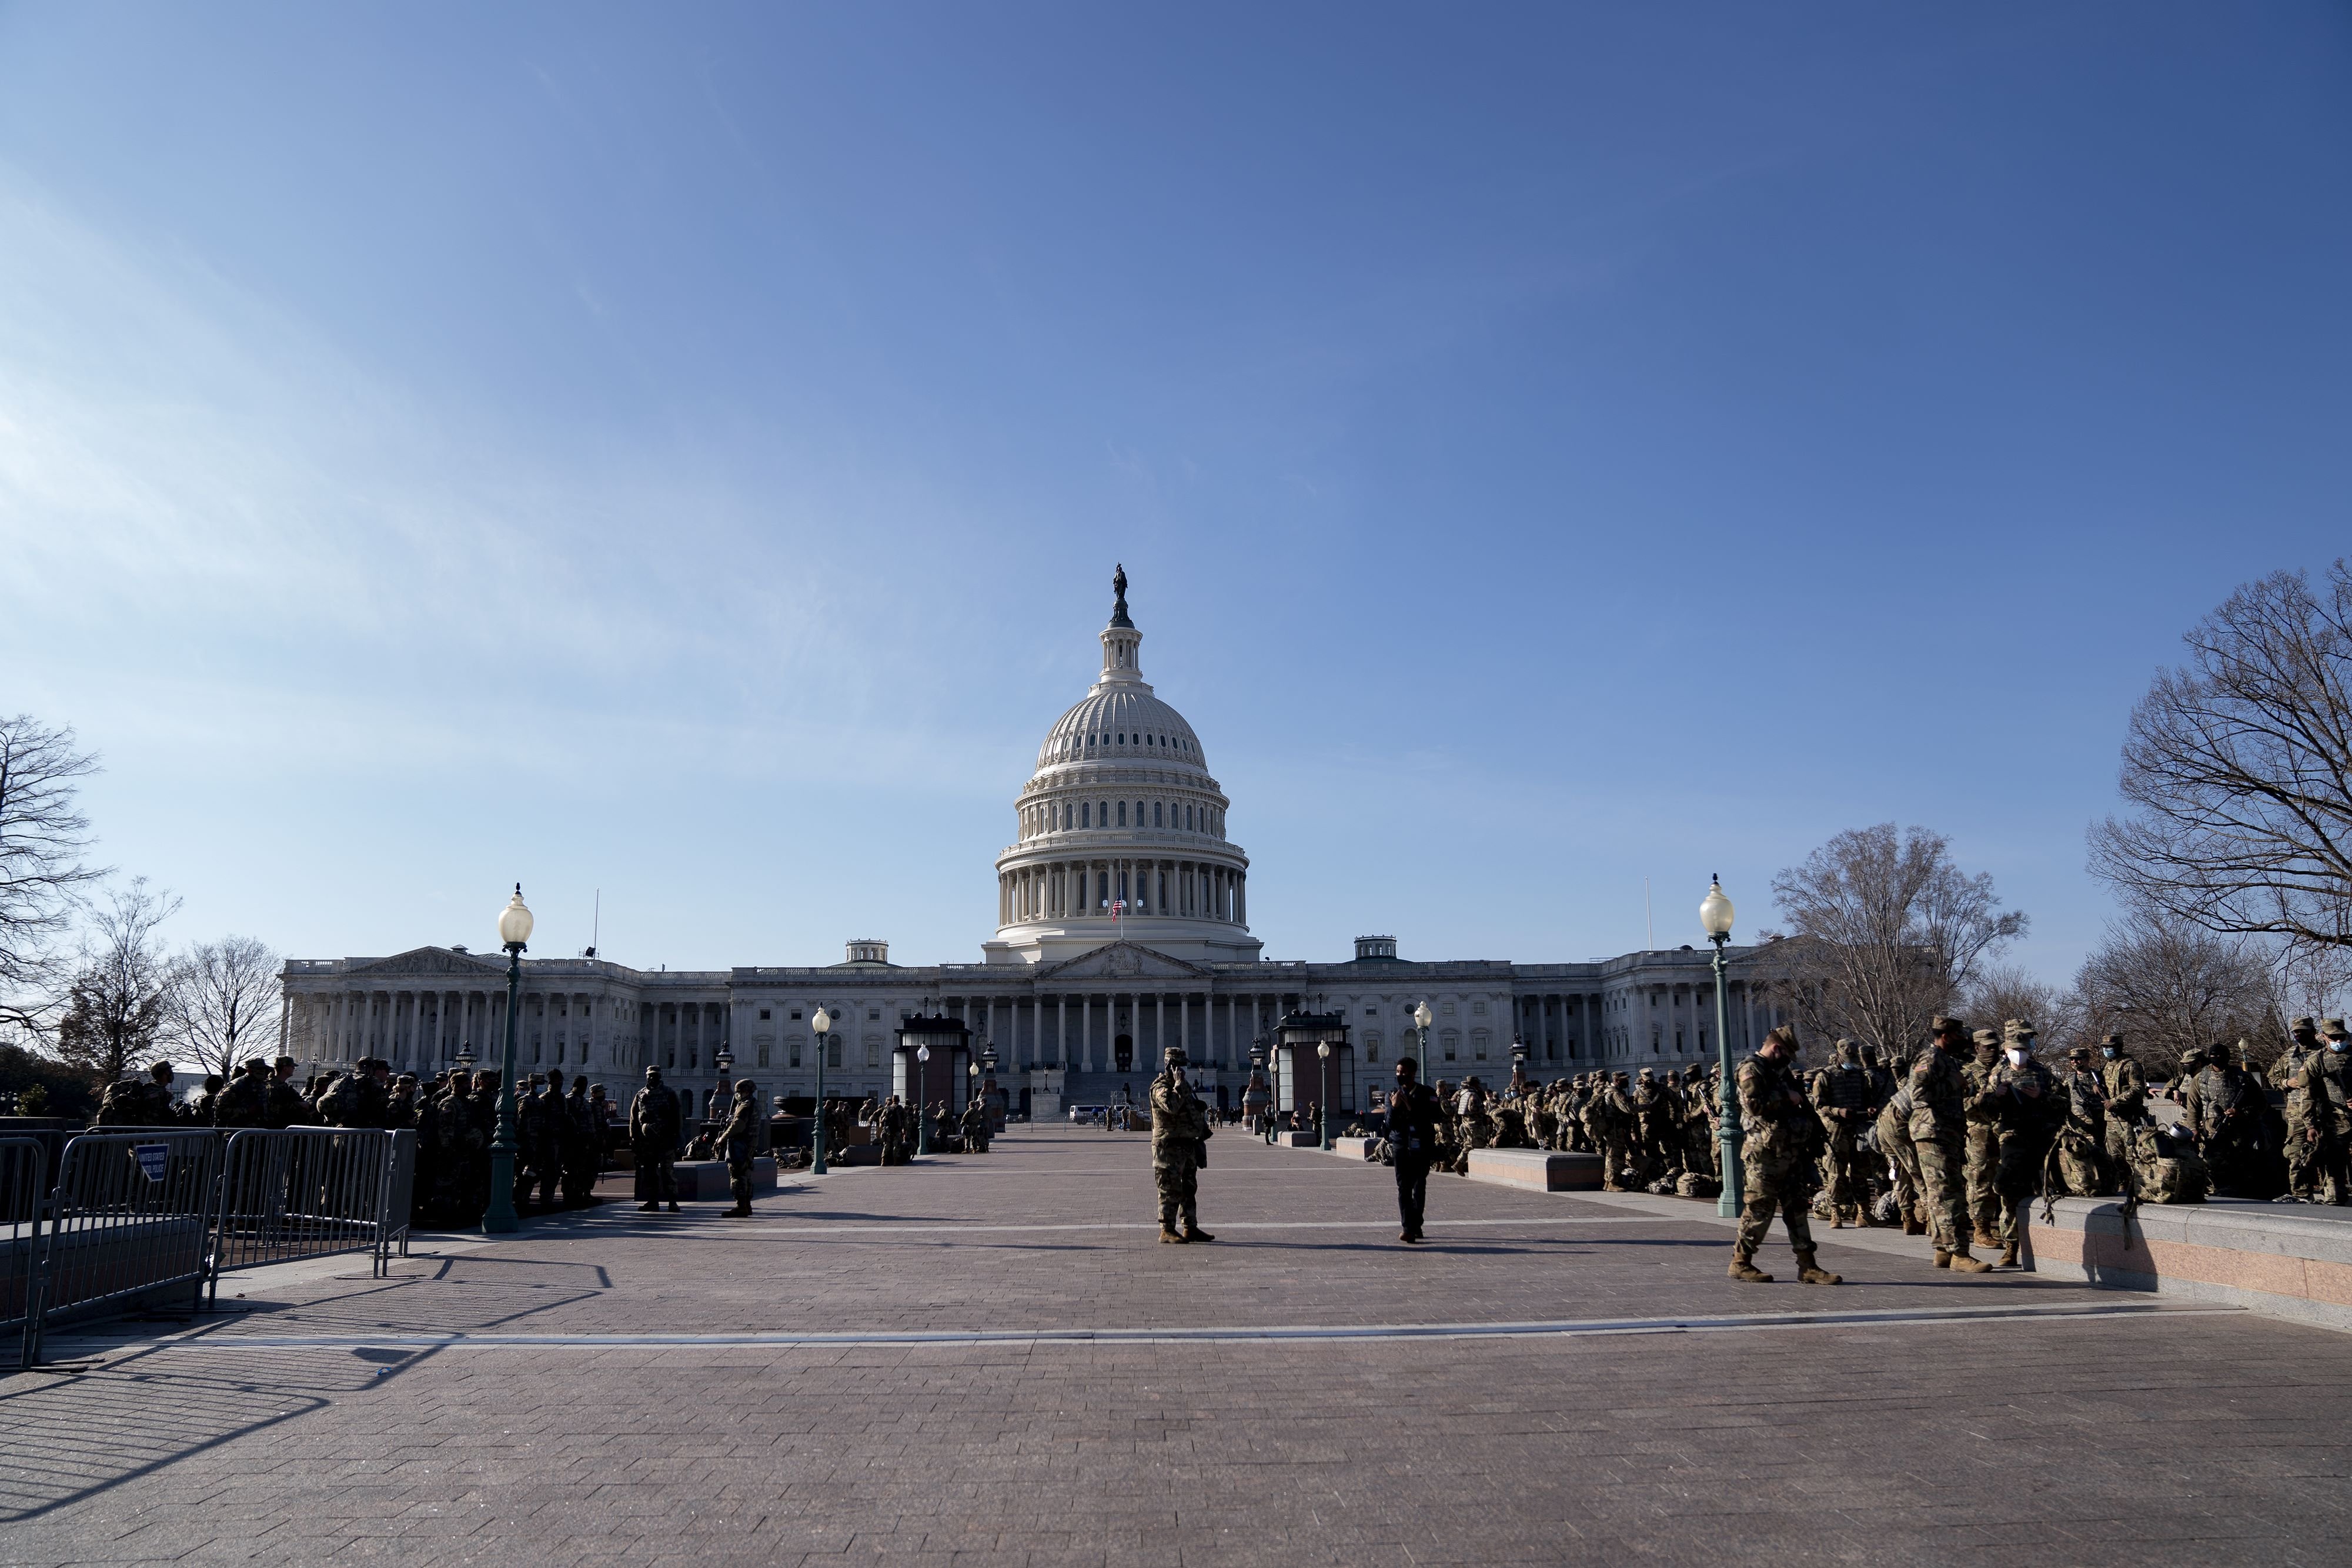 Members of the National Guard gather outside the U.S. Capitol in Washington, D.C., Jan. 14, 2021. (AFP Photo)